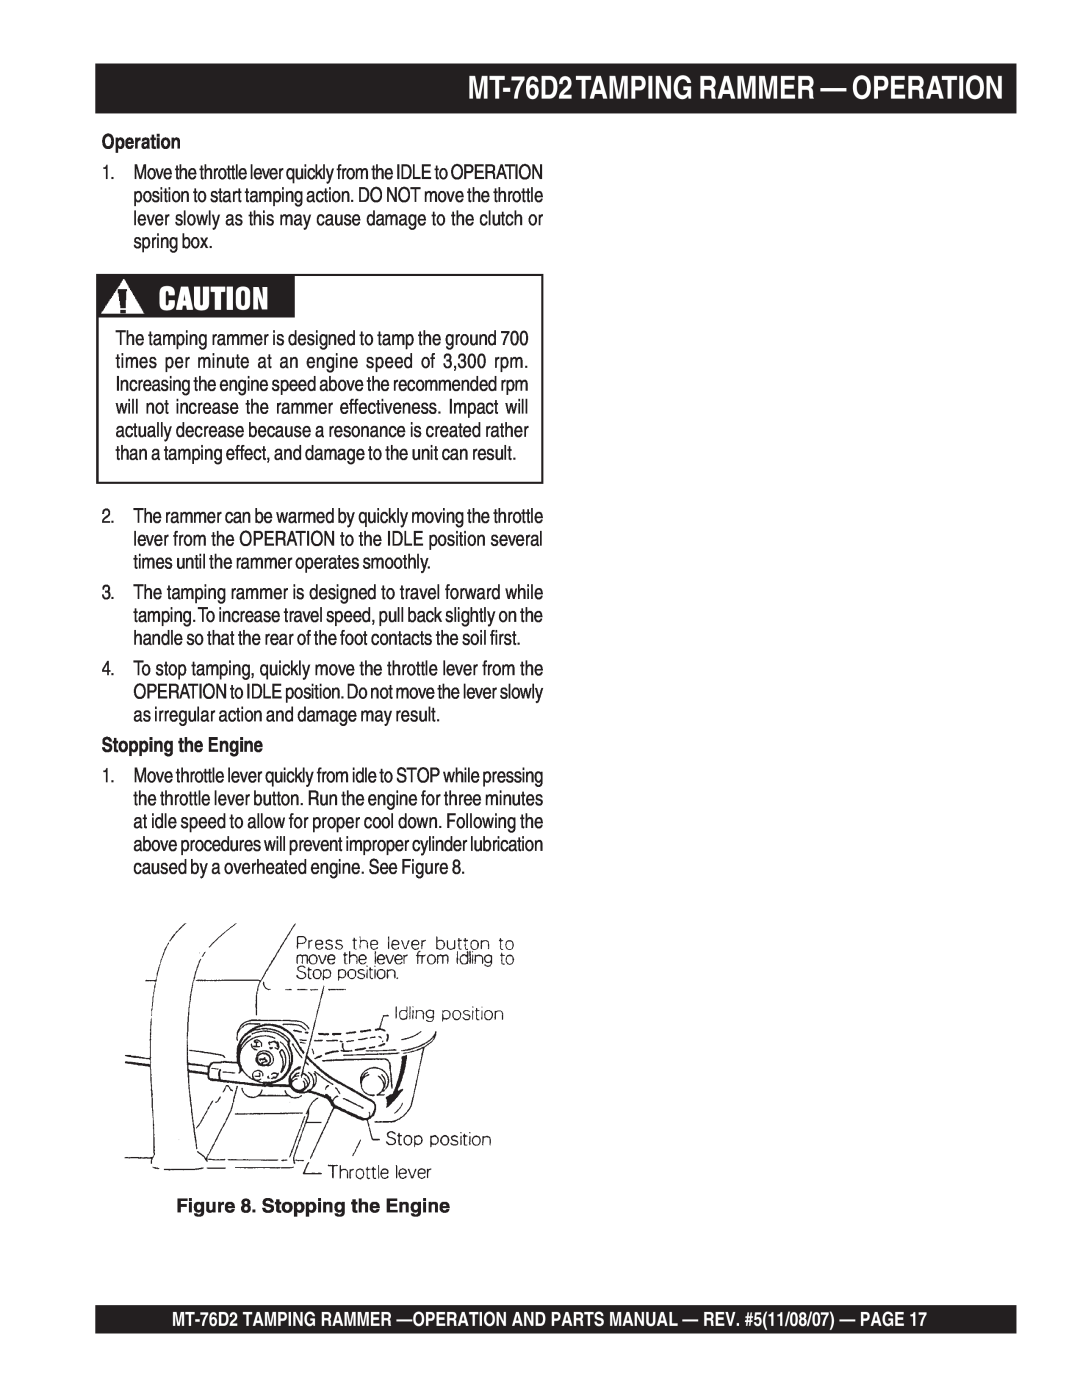 Multiquip manual MT-76D2TAMPING RAMMER - OPERATION, Operation, Stopping the Engine 